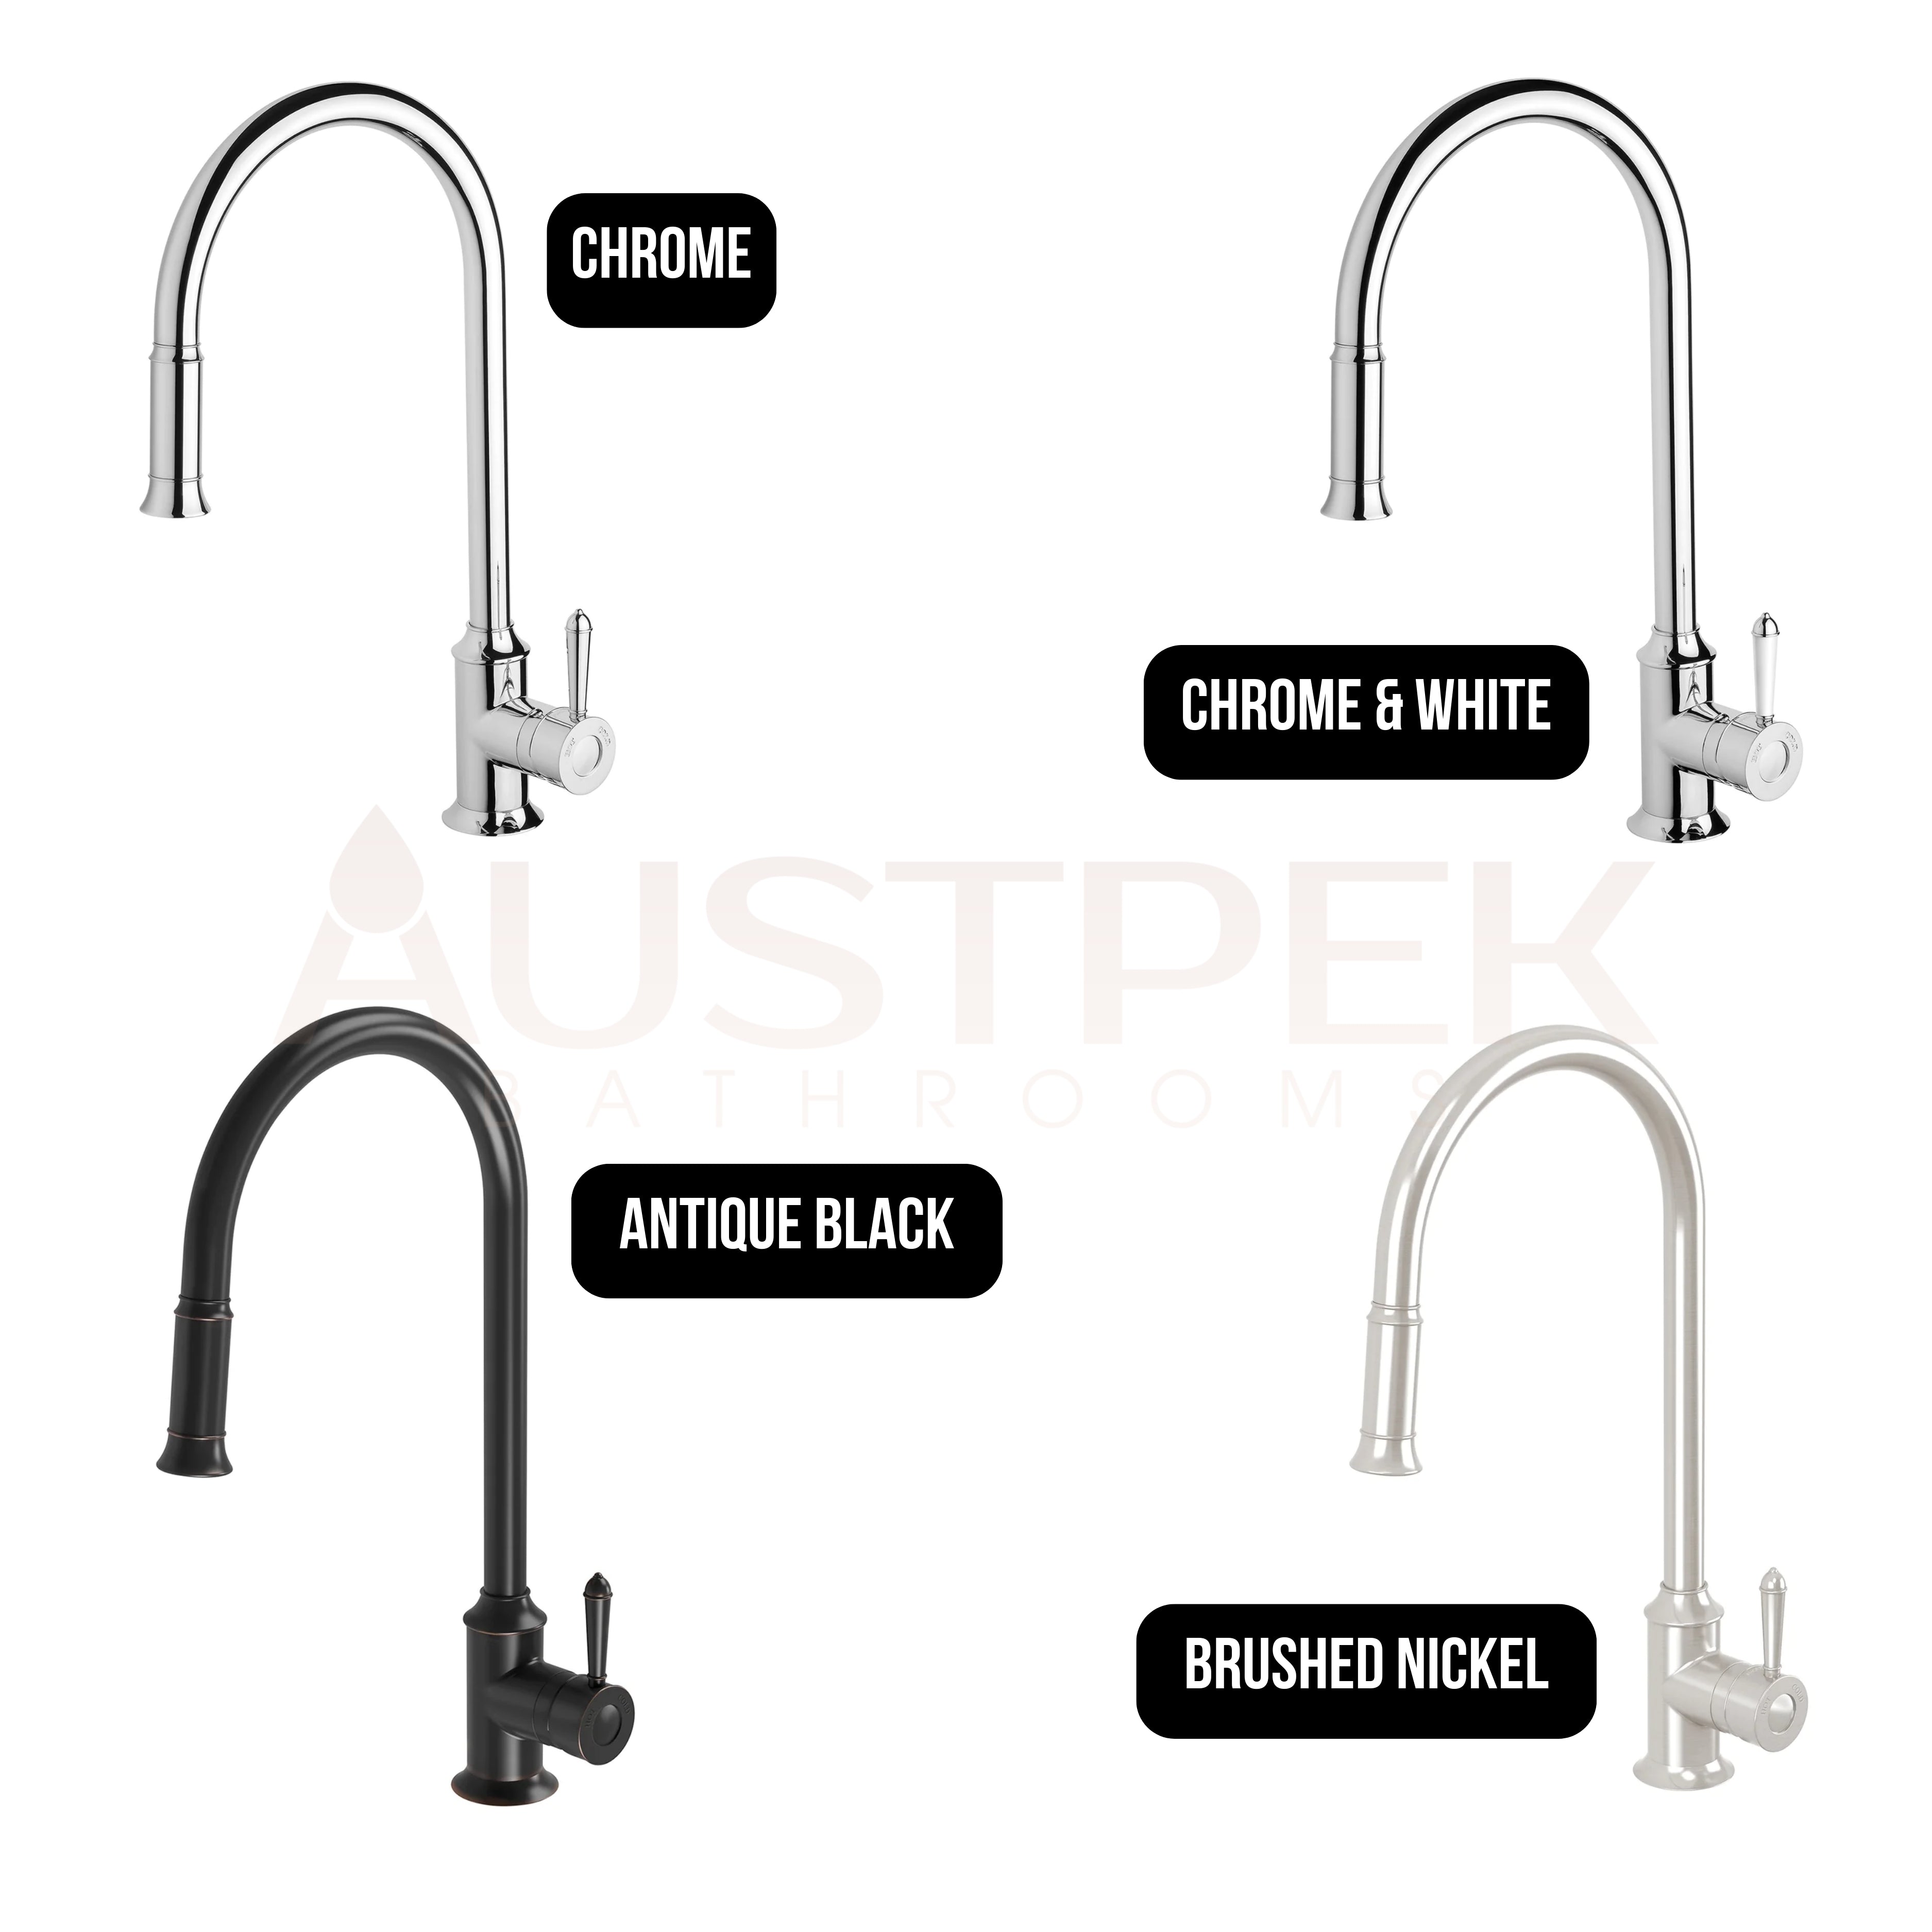 PHOENIX NOSTALGIA PULL OUT SINK MIXER BRUSHED NICKEL